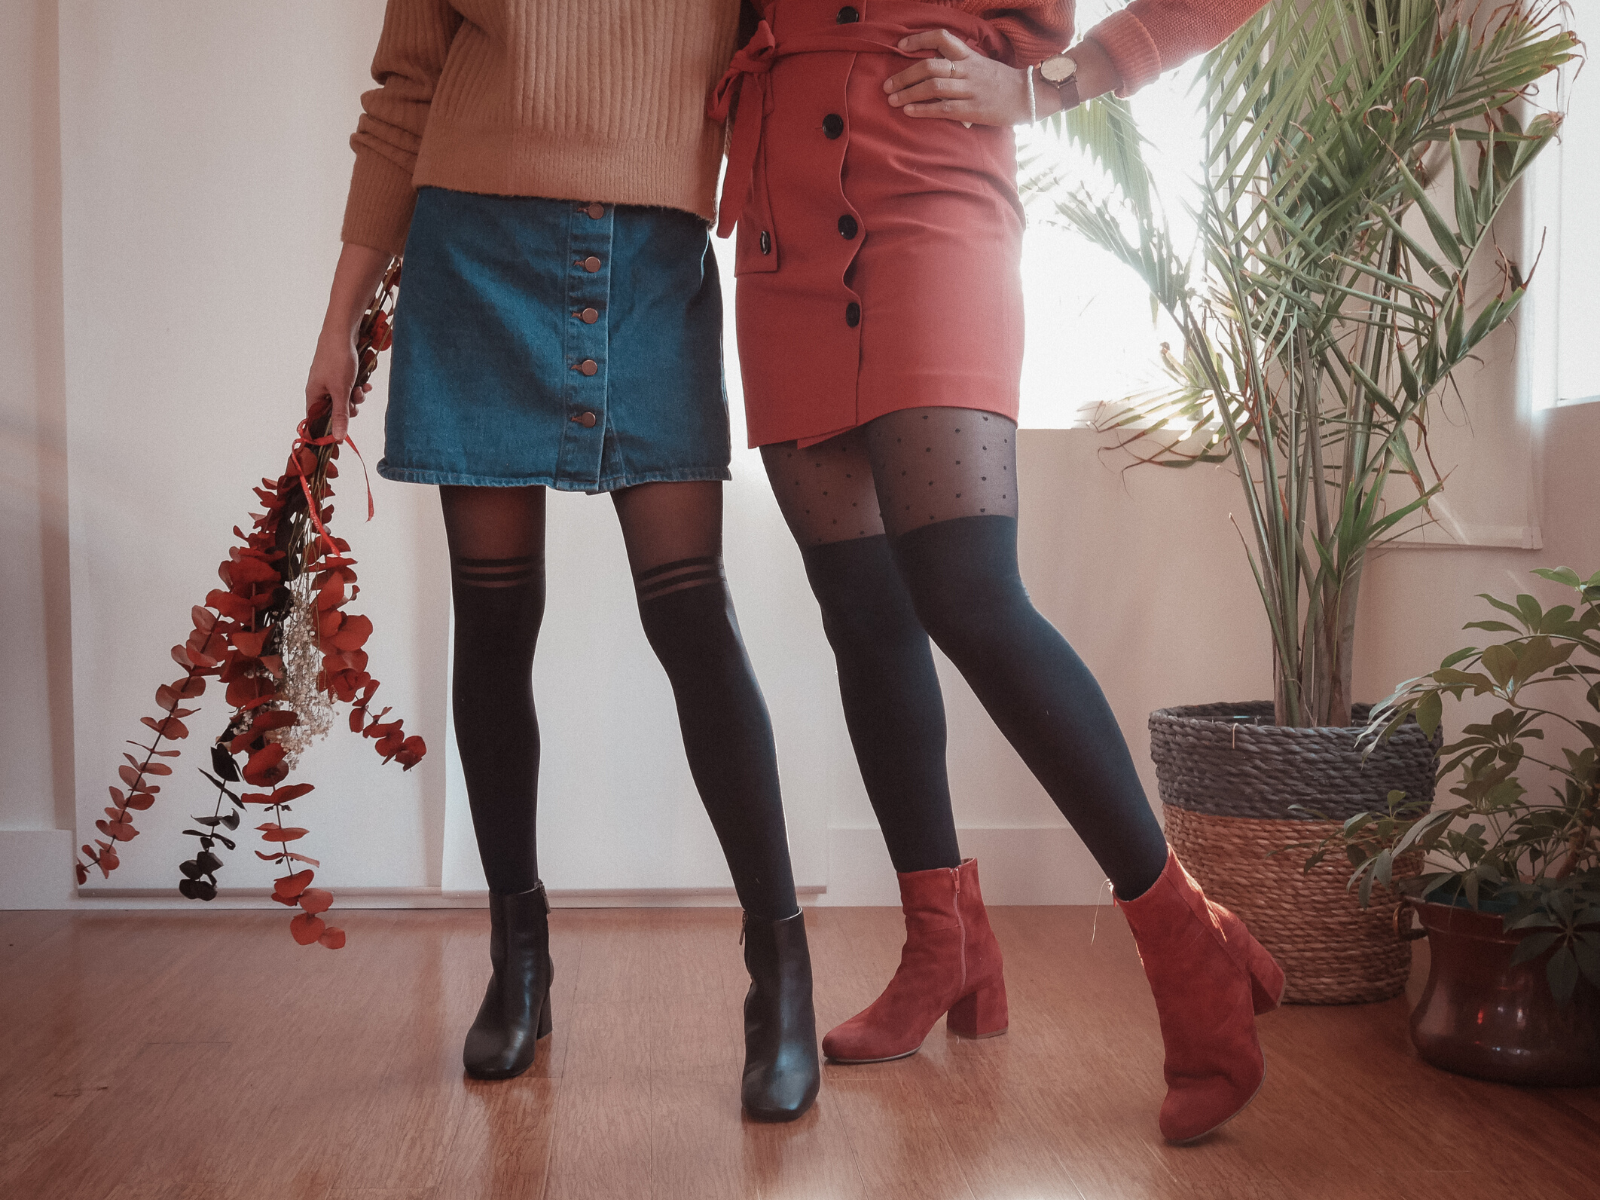 Everything You Need To Know To Choose The Right Size Tights From Images, Photos, Reviews